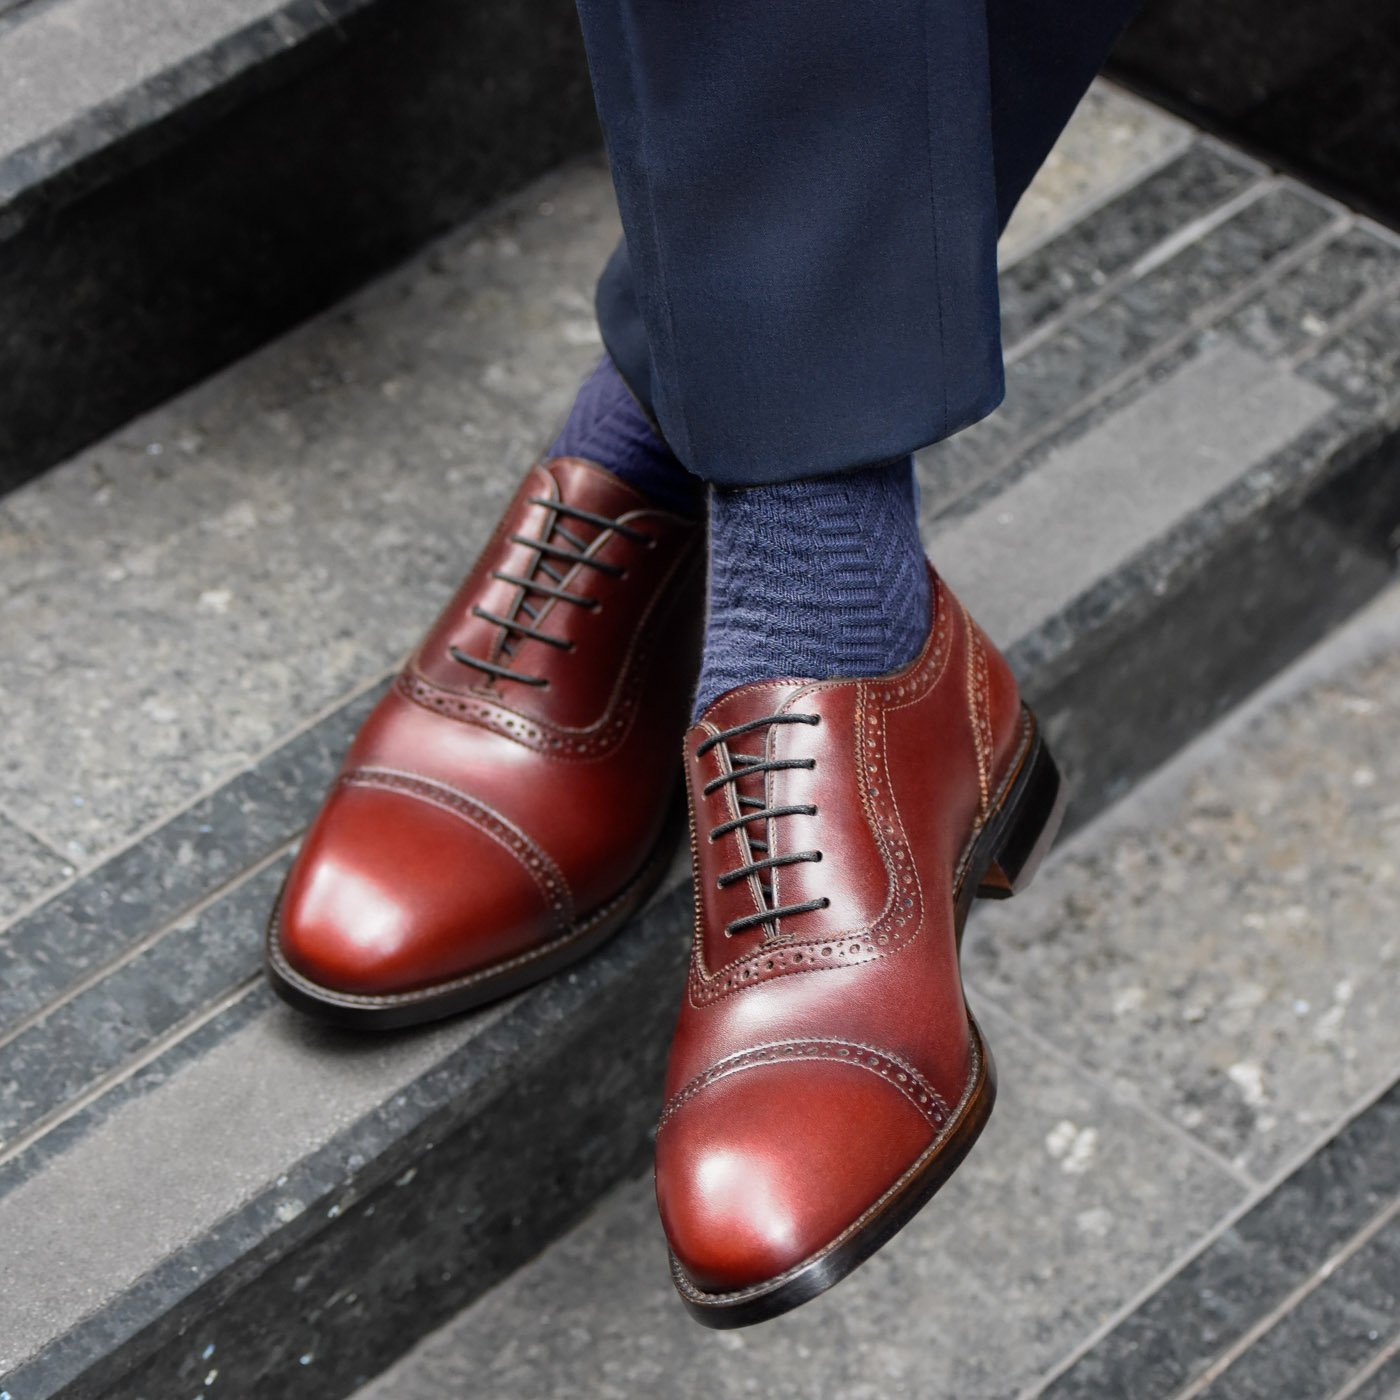 dress shoes good for your feet